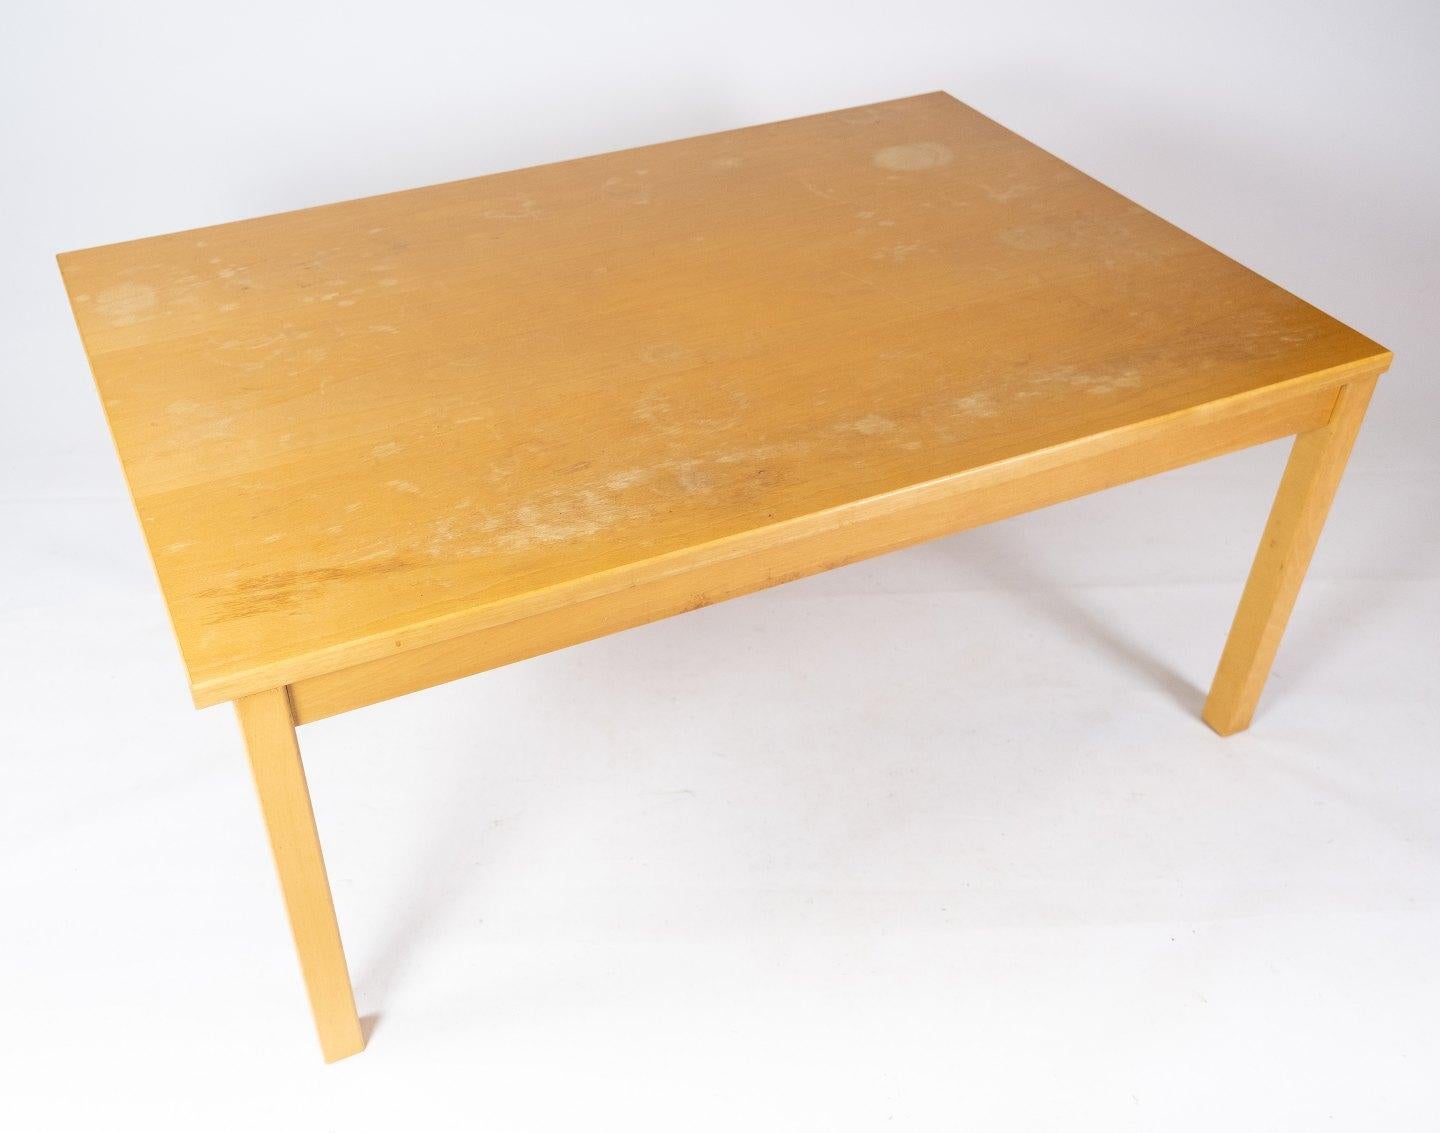 This coffee table in beech is a beautiful example of Danish design from the 1960s. The beech wood gives the table a light and natural tone that fits perfectly with the minimalist aesthetics of the time.

In the 1960s, Danish design was characterized